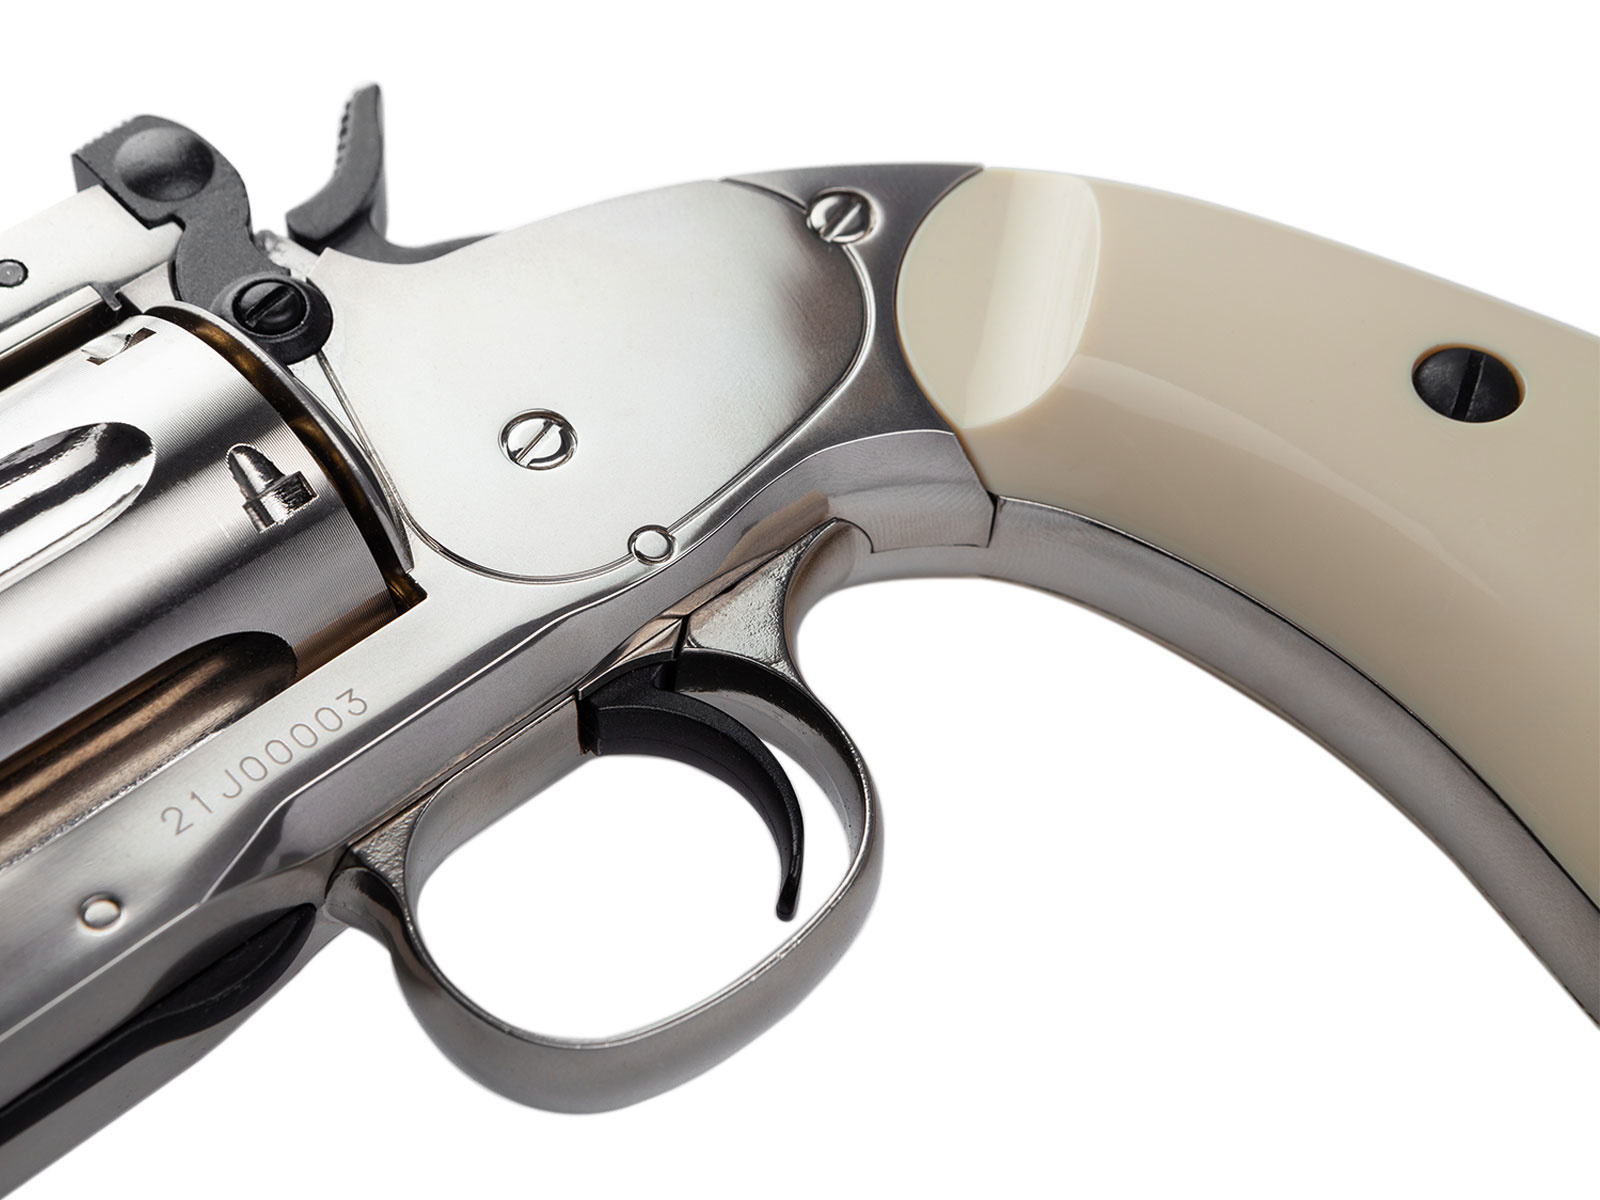 ASG 6 inch Schofield Co2 Revolver 4.5mm (.177) Co2 BB 3.0 Joule - Silver